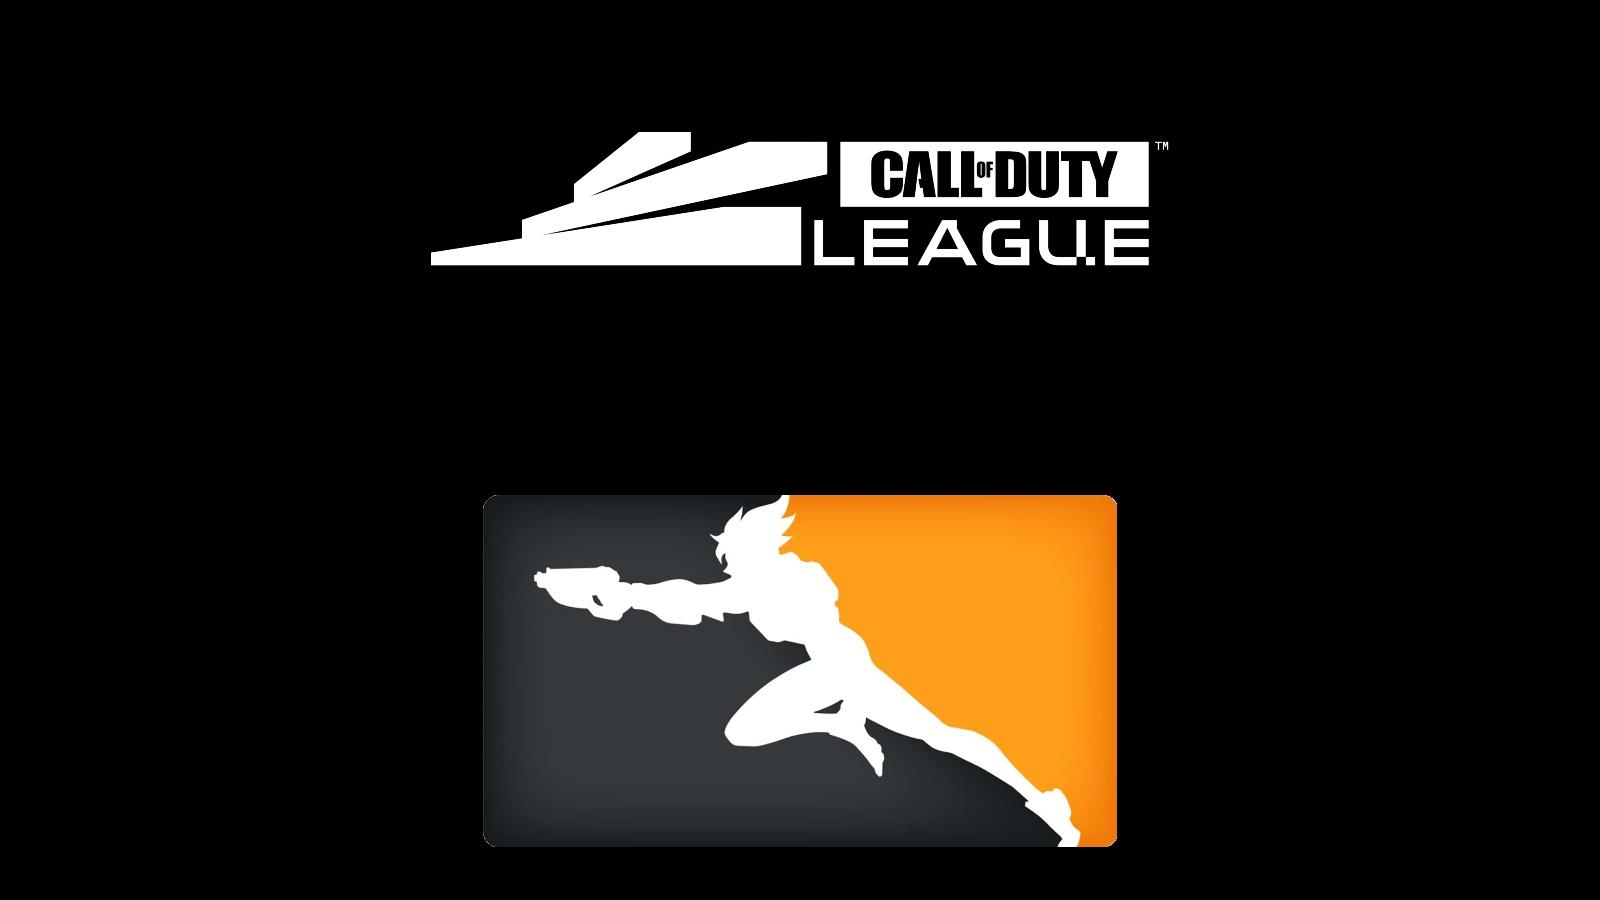 Call of Duty League logo and Overwatch League logo on black background